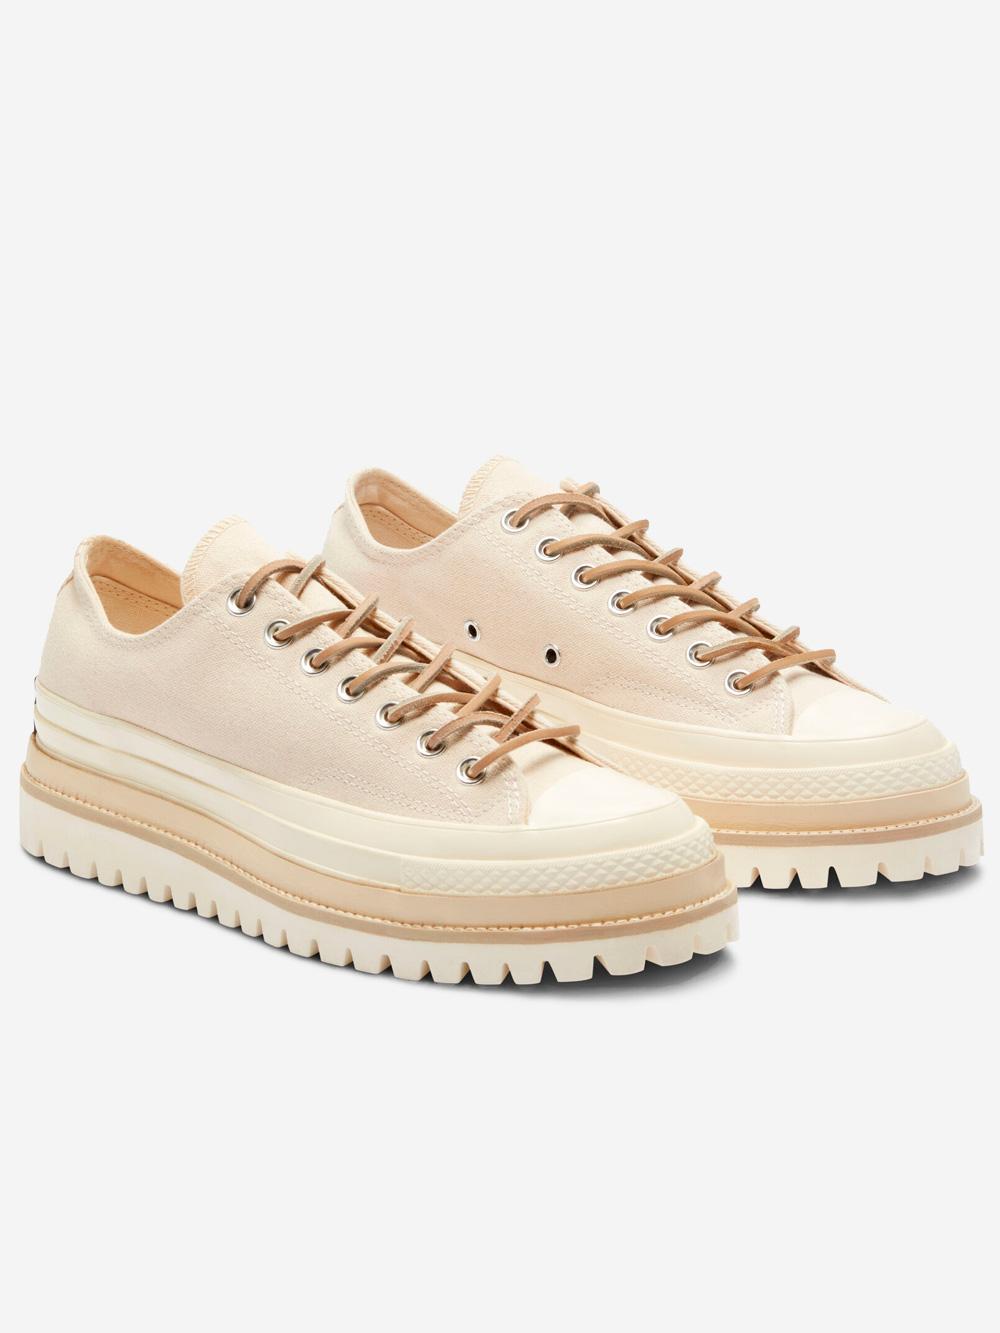 Converse Ct70 Canvas Ltd Ox Sneakers in Natural | Lyst